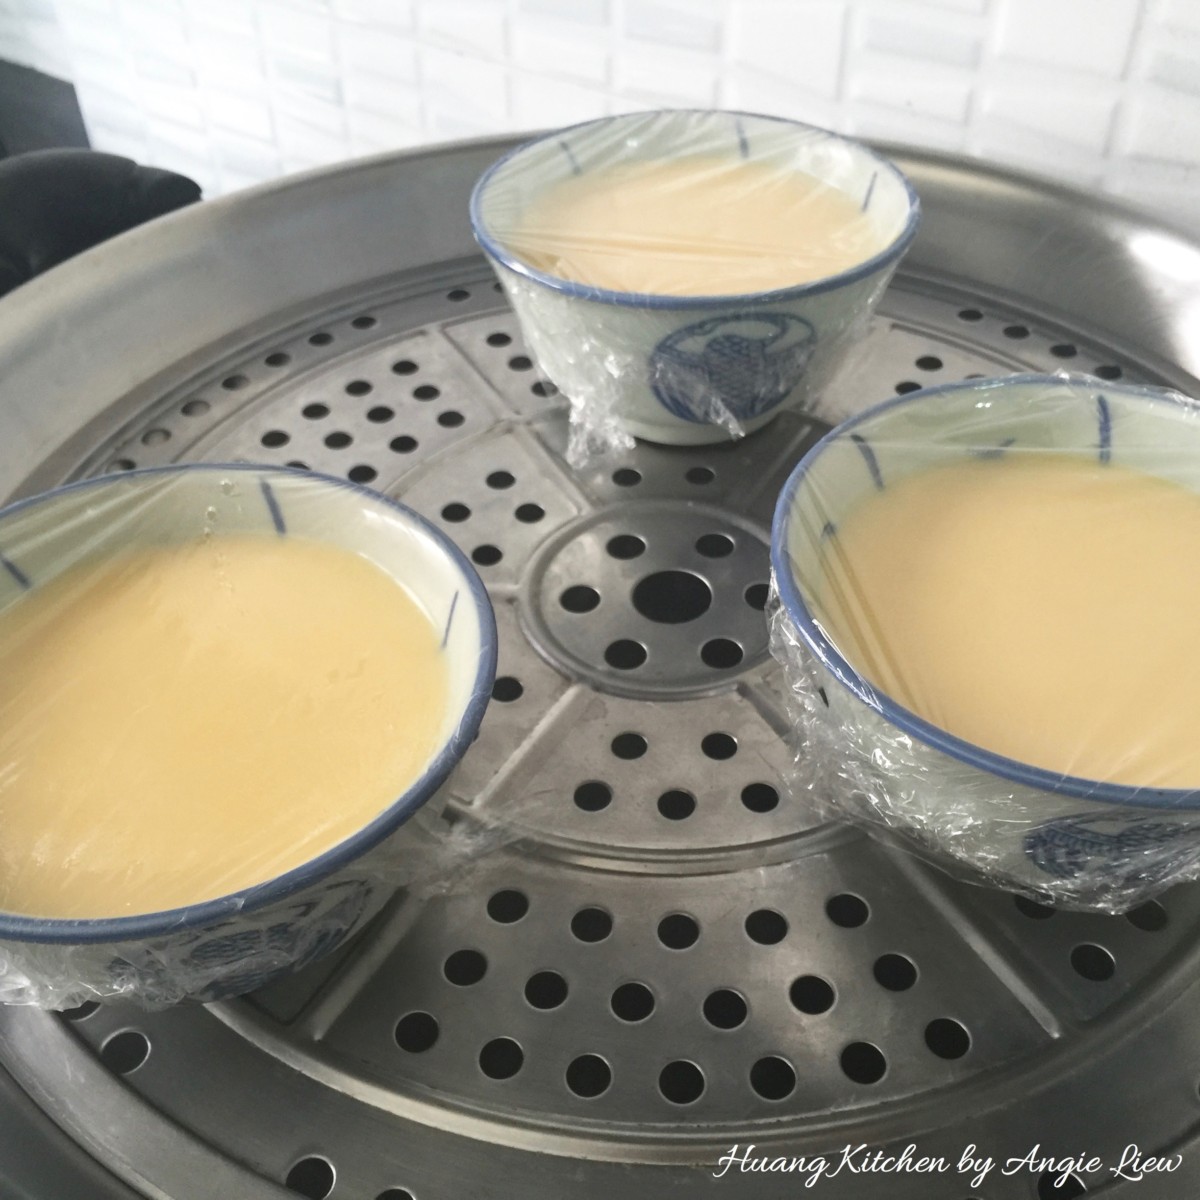 Steamed Egg Pudding Recipe - Place in steamer